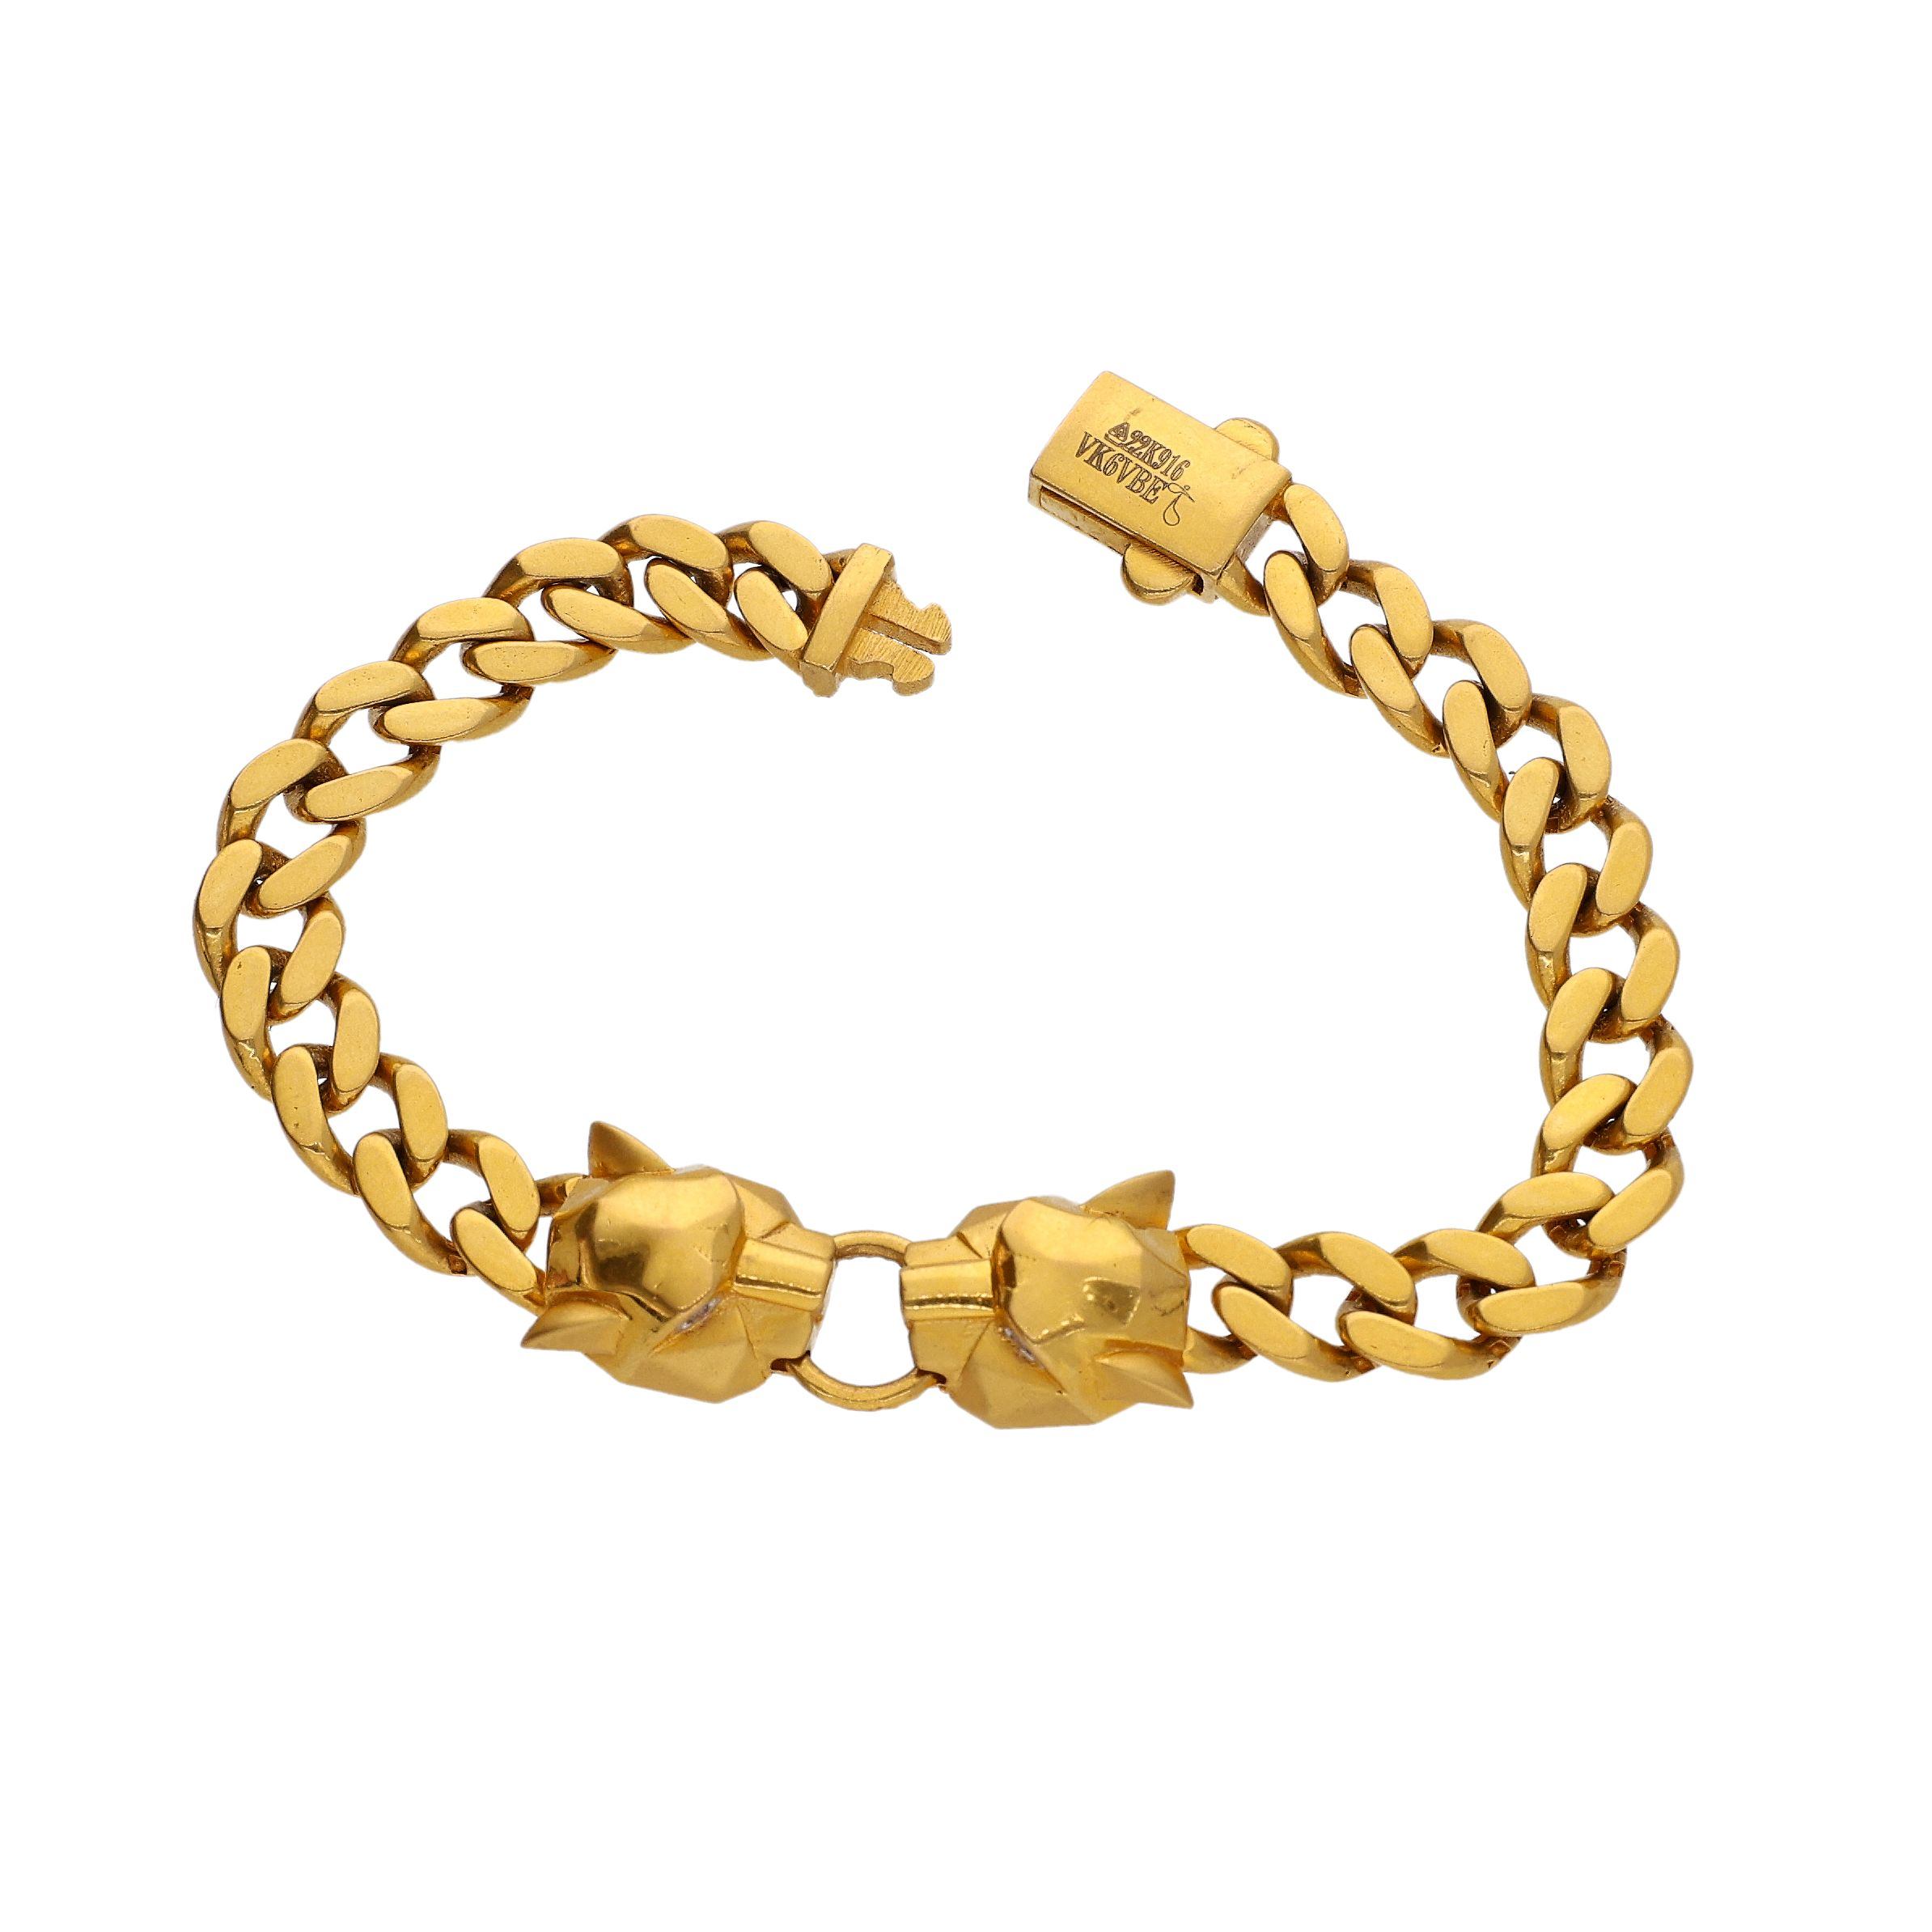 Stealth Medical Alert Bracelet in Silver and Yellow Gold